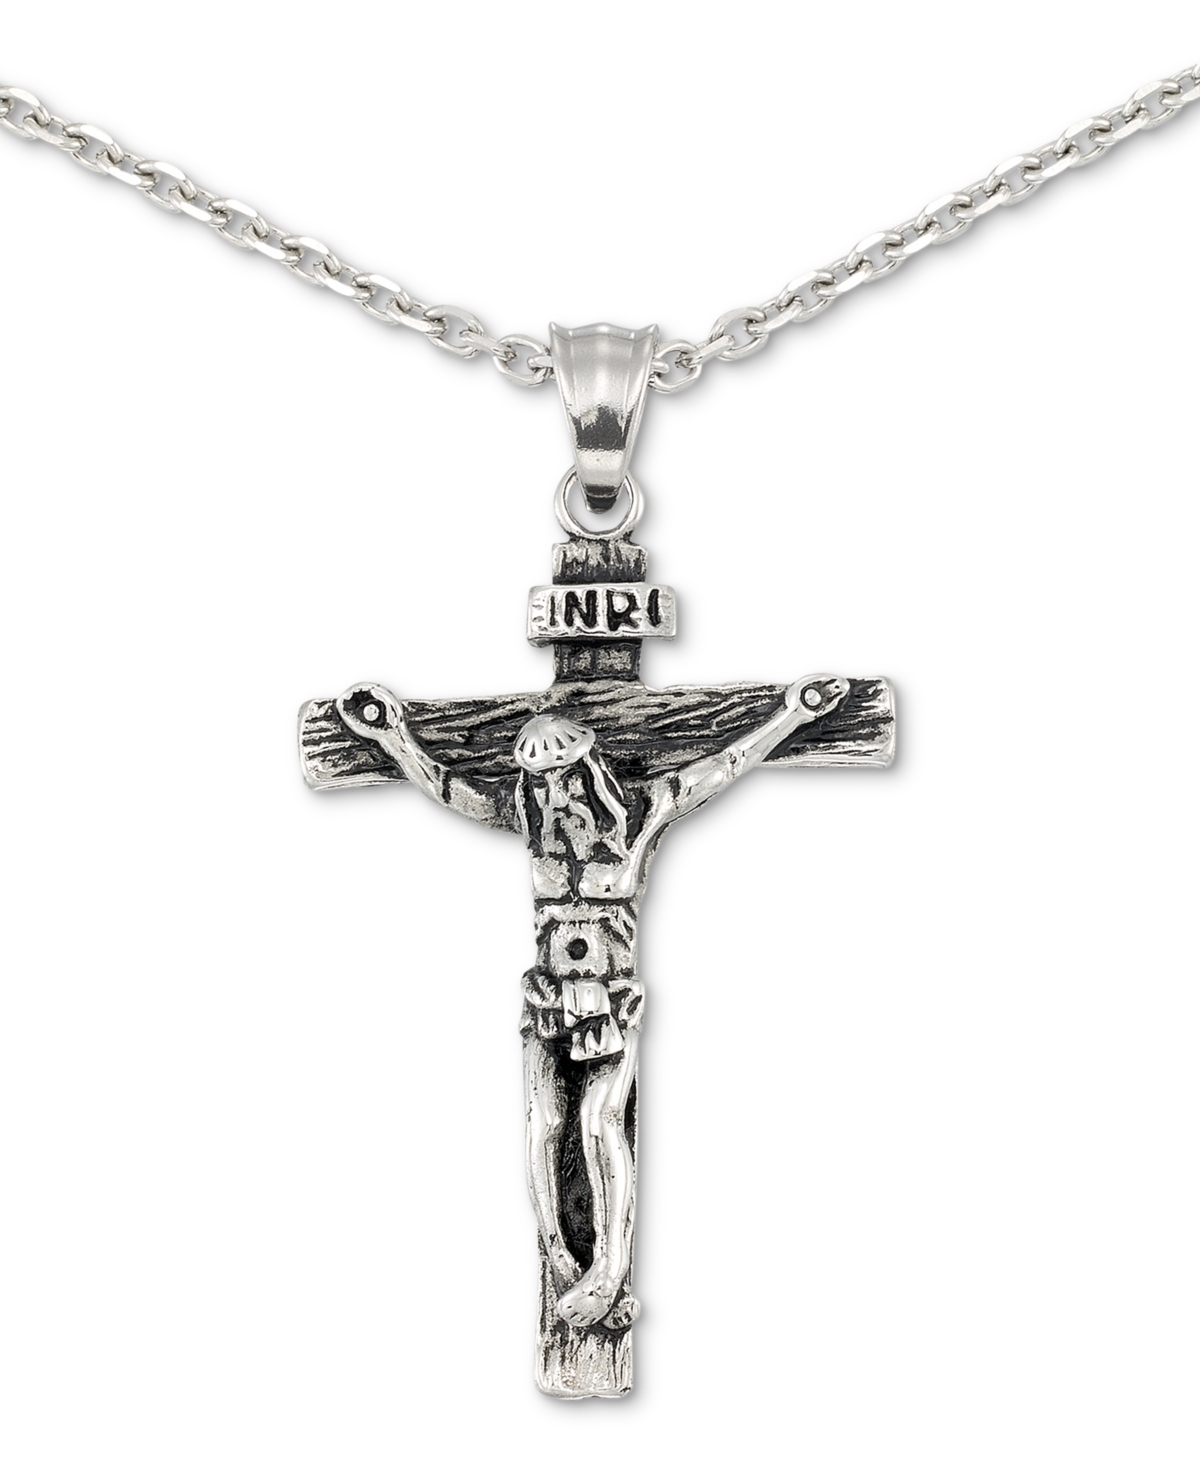 Smith Crucifix 24" Pendant Necklace in Stainless Steel - Stainless Steel